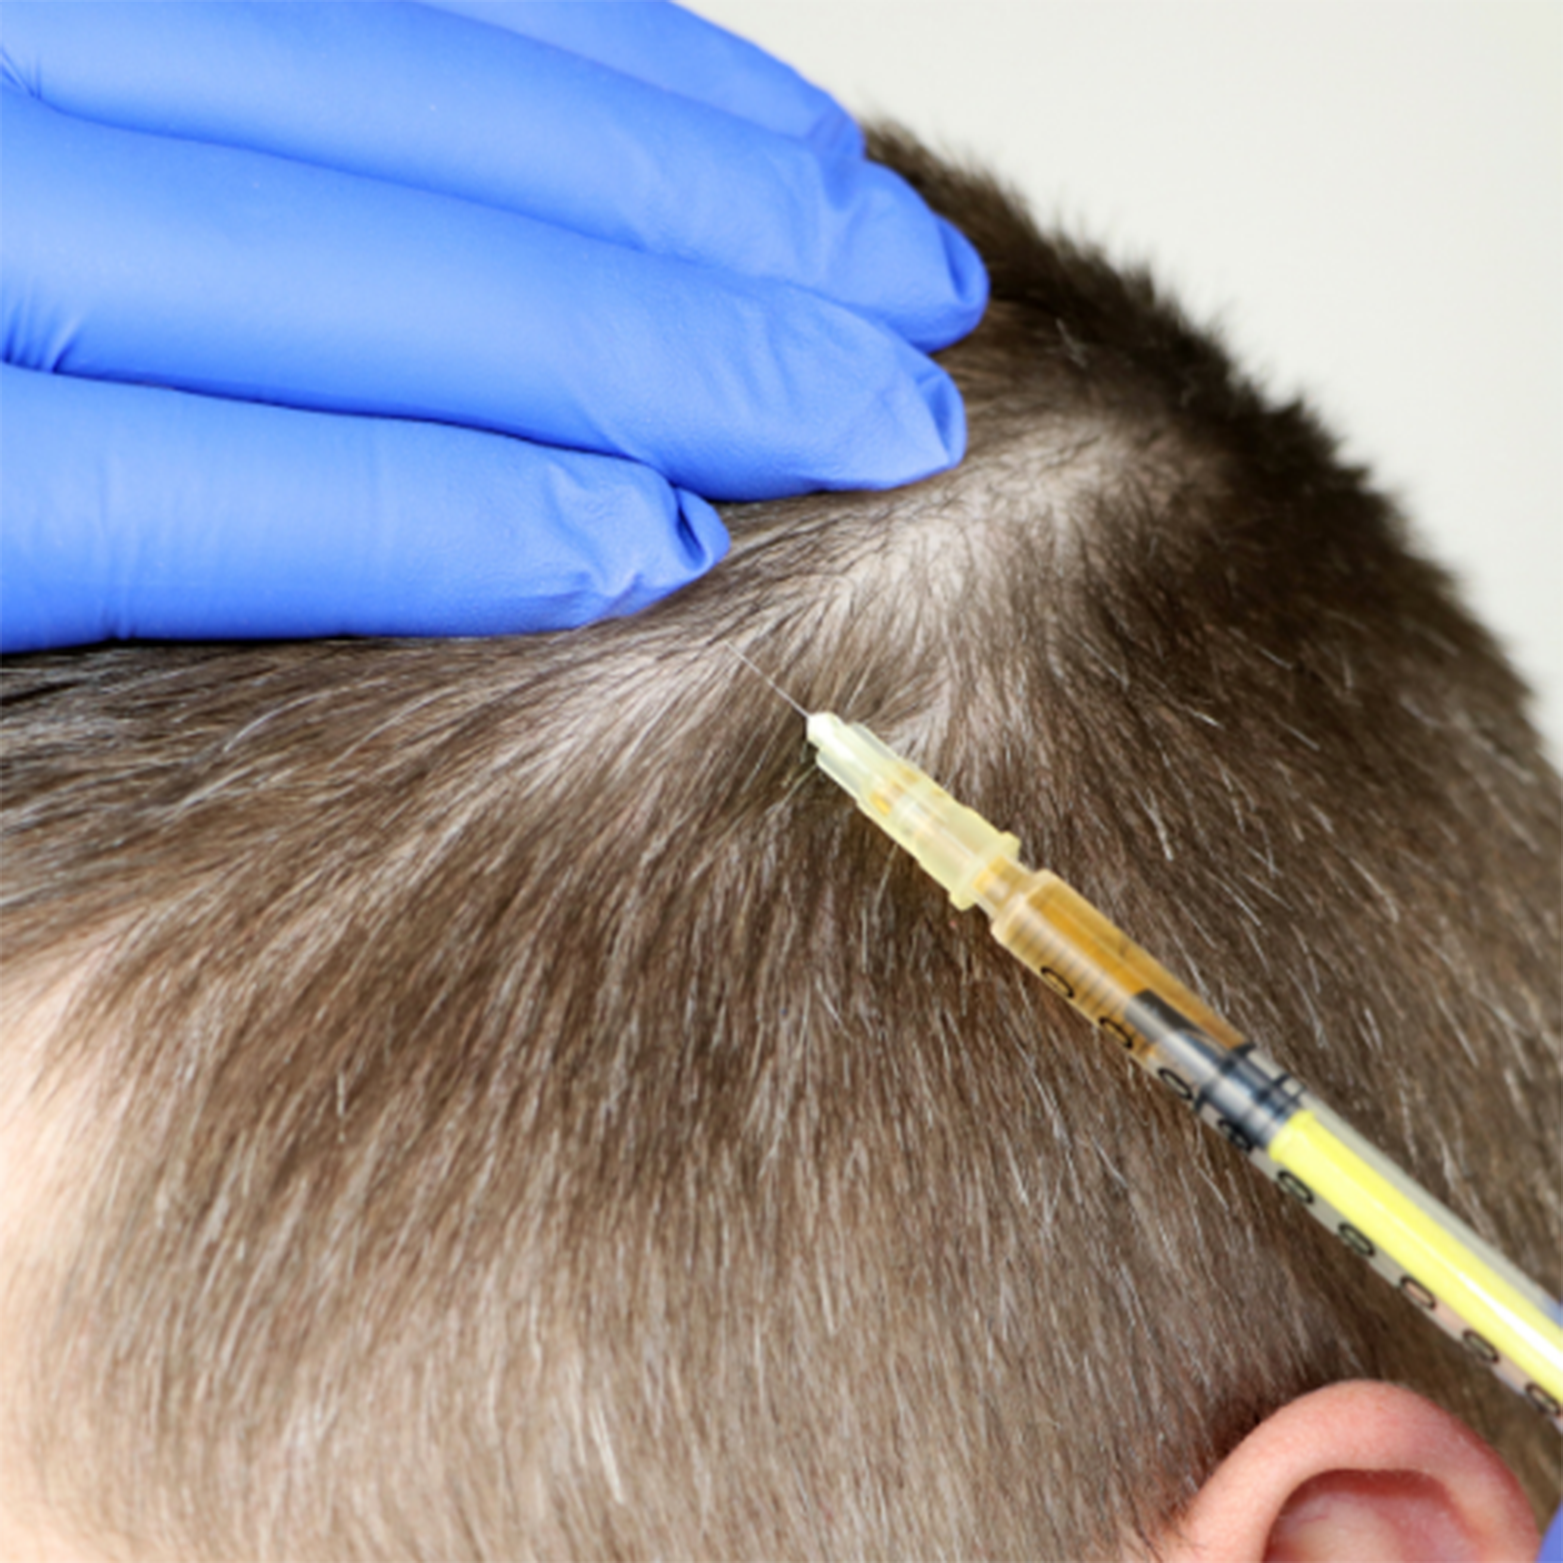 Complication Insure covers expenses related to problems that could be associated with hair transplantation procedures.